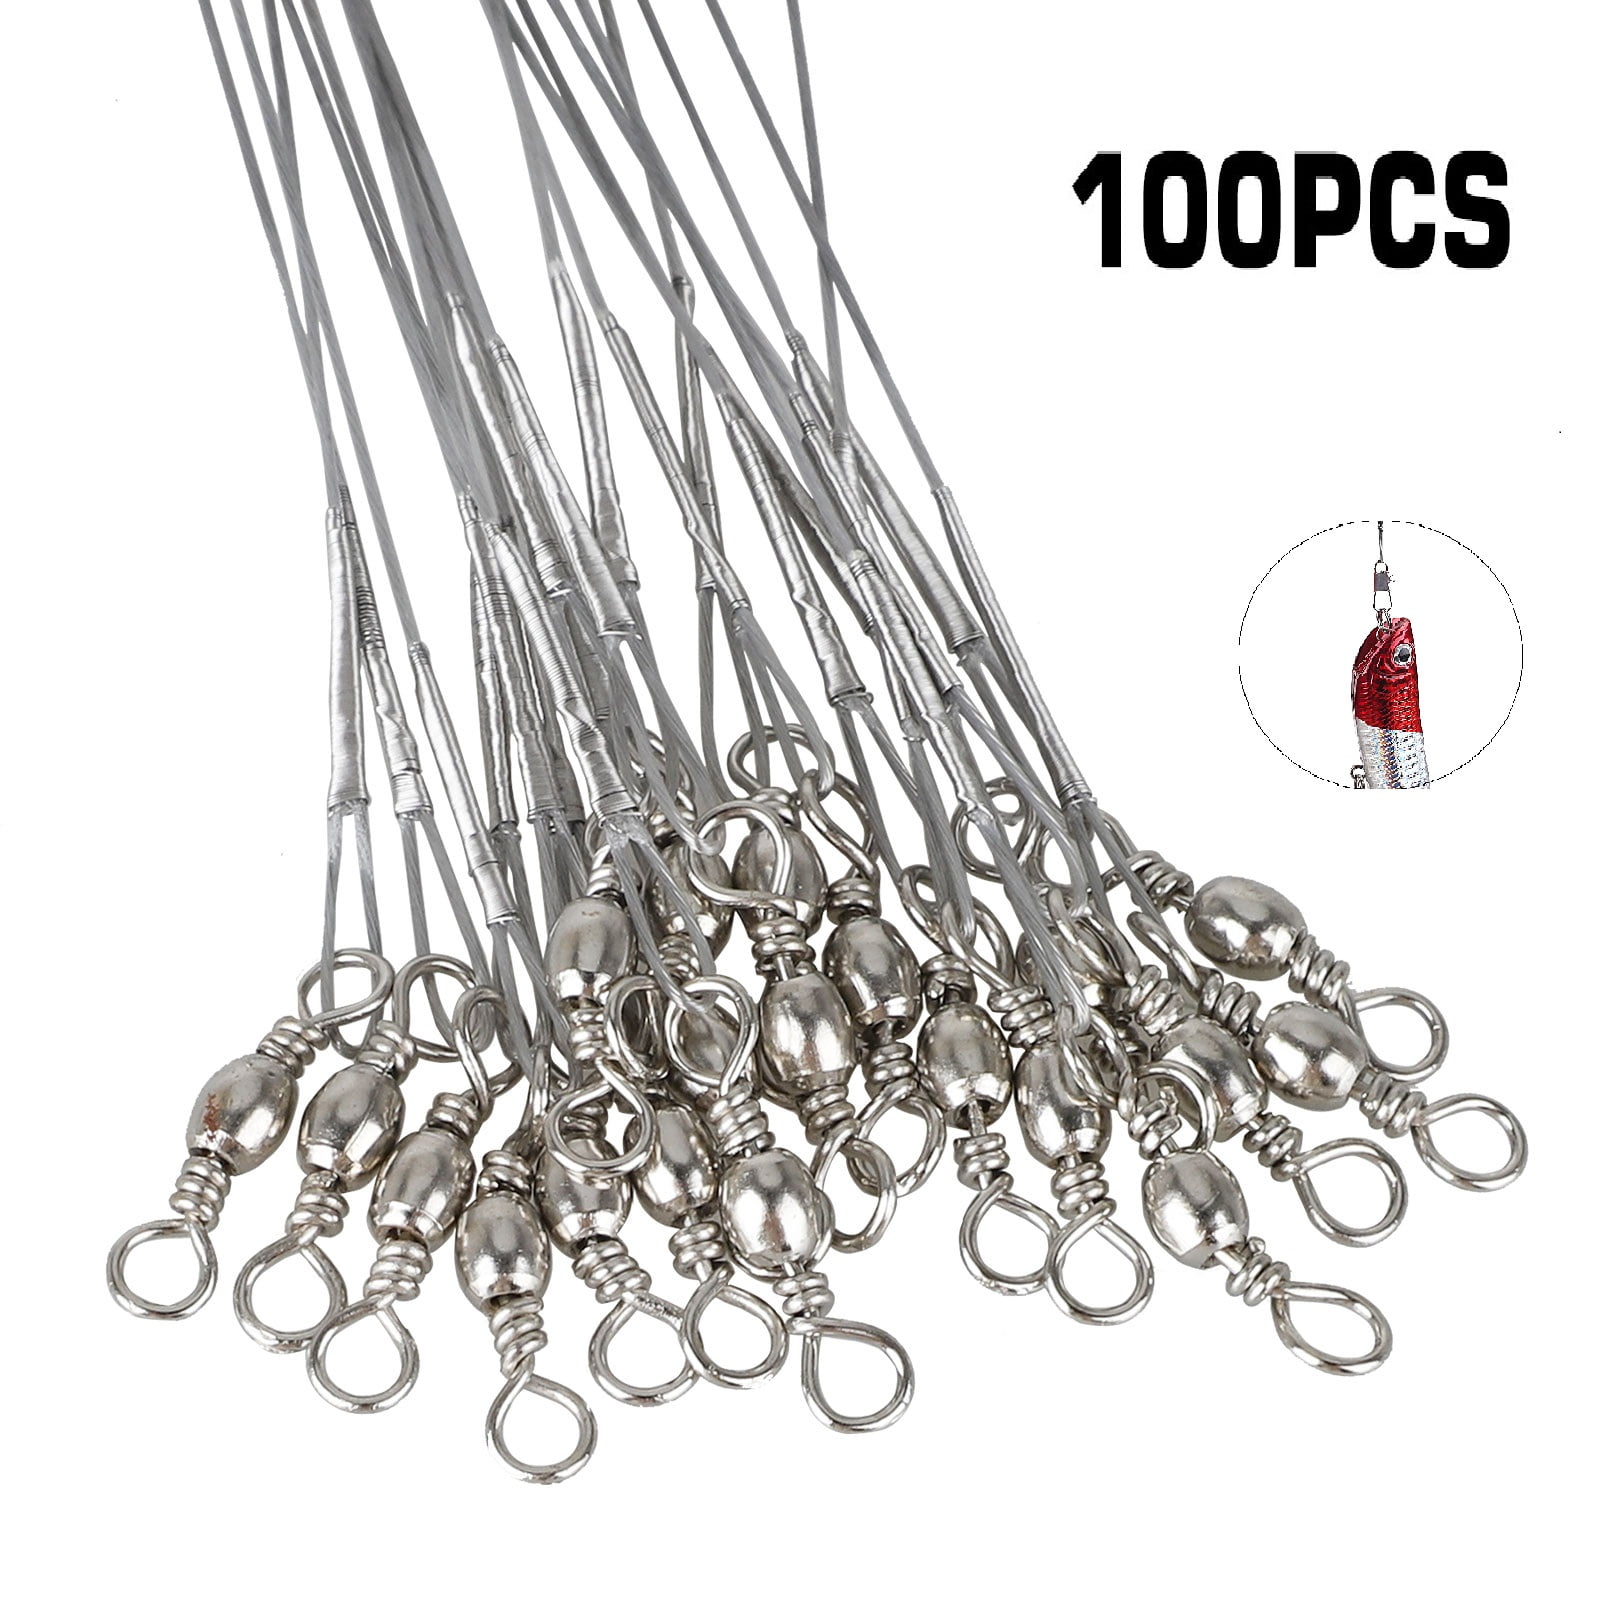 20pcs Fishing Lure Trace Wire Leader line Swivel Tackle Spinner Shark 15-30cm Bu 